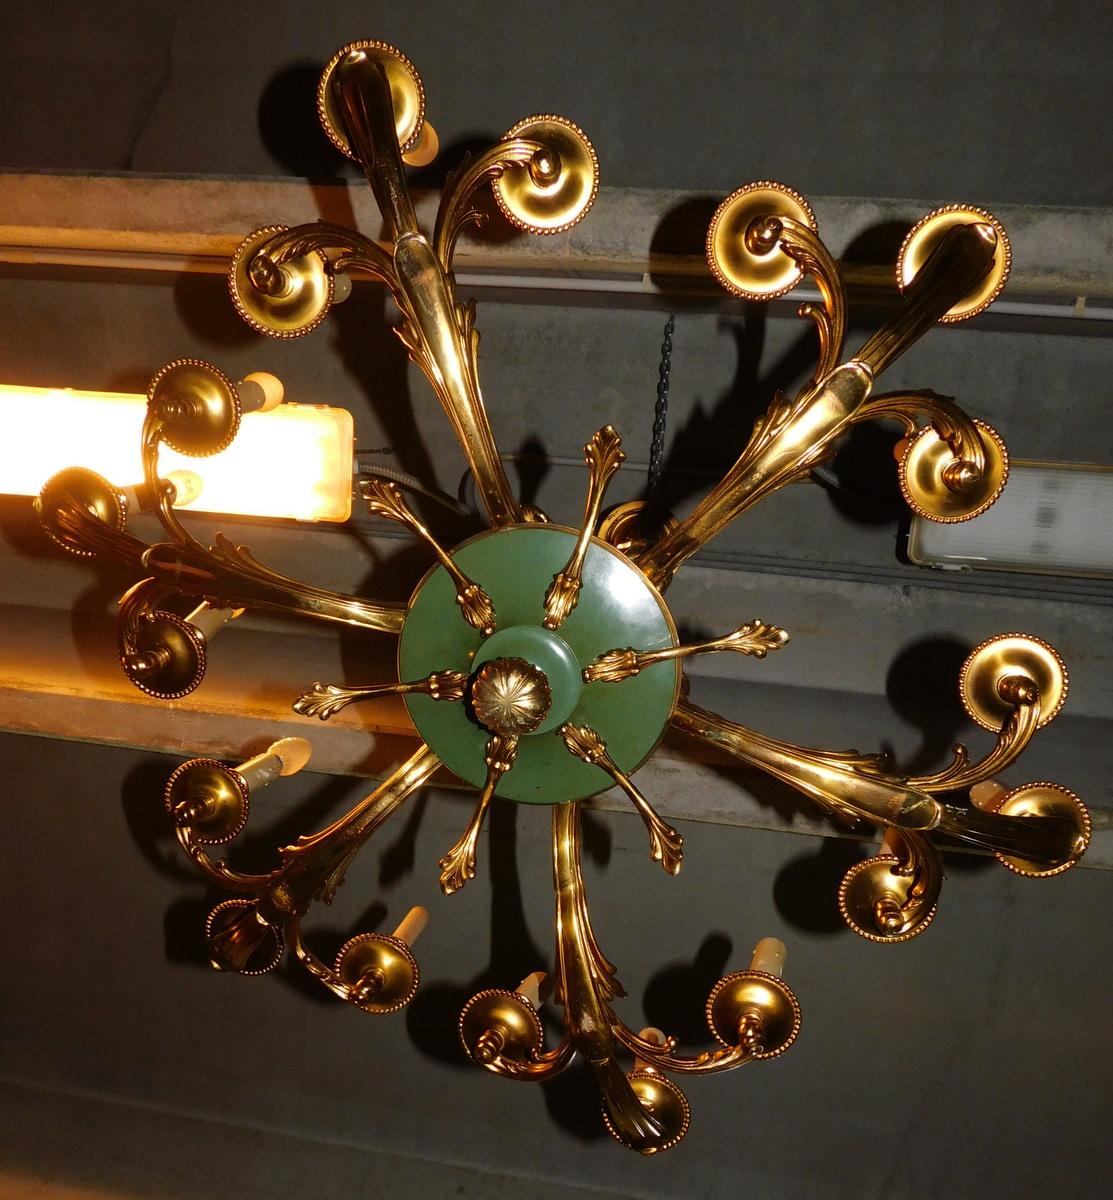 Ceiling Chandelier Lamp, 18 Lights, Gilded Brass, Italian Liberty '900 For Sale 4